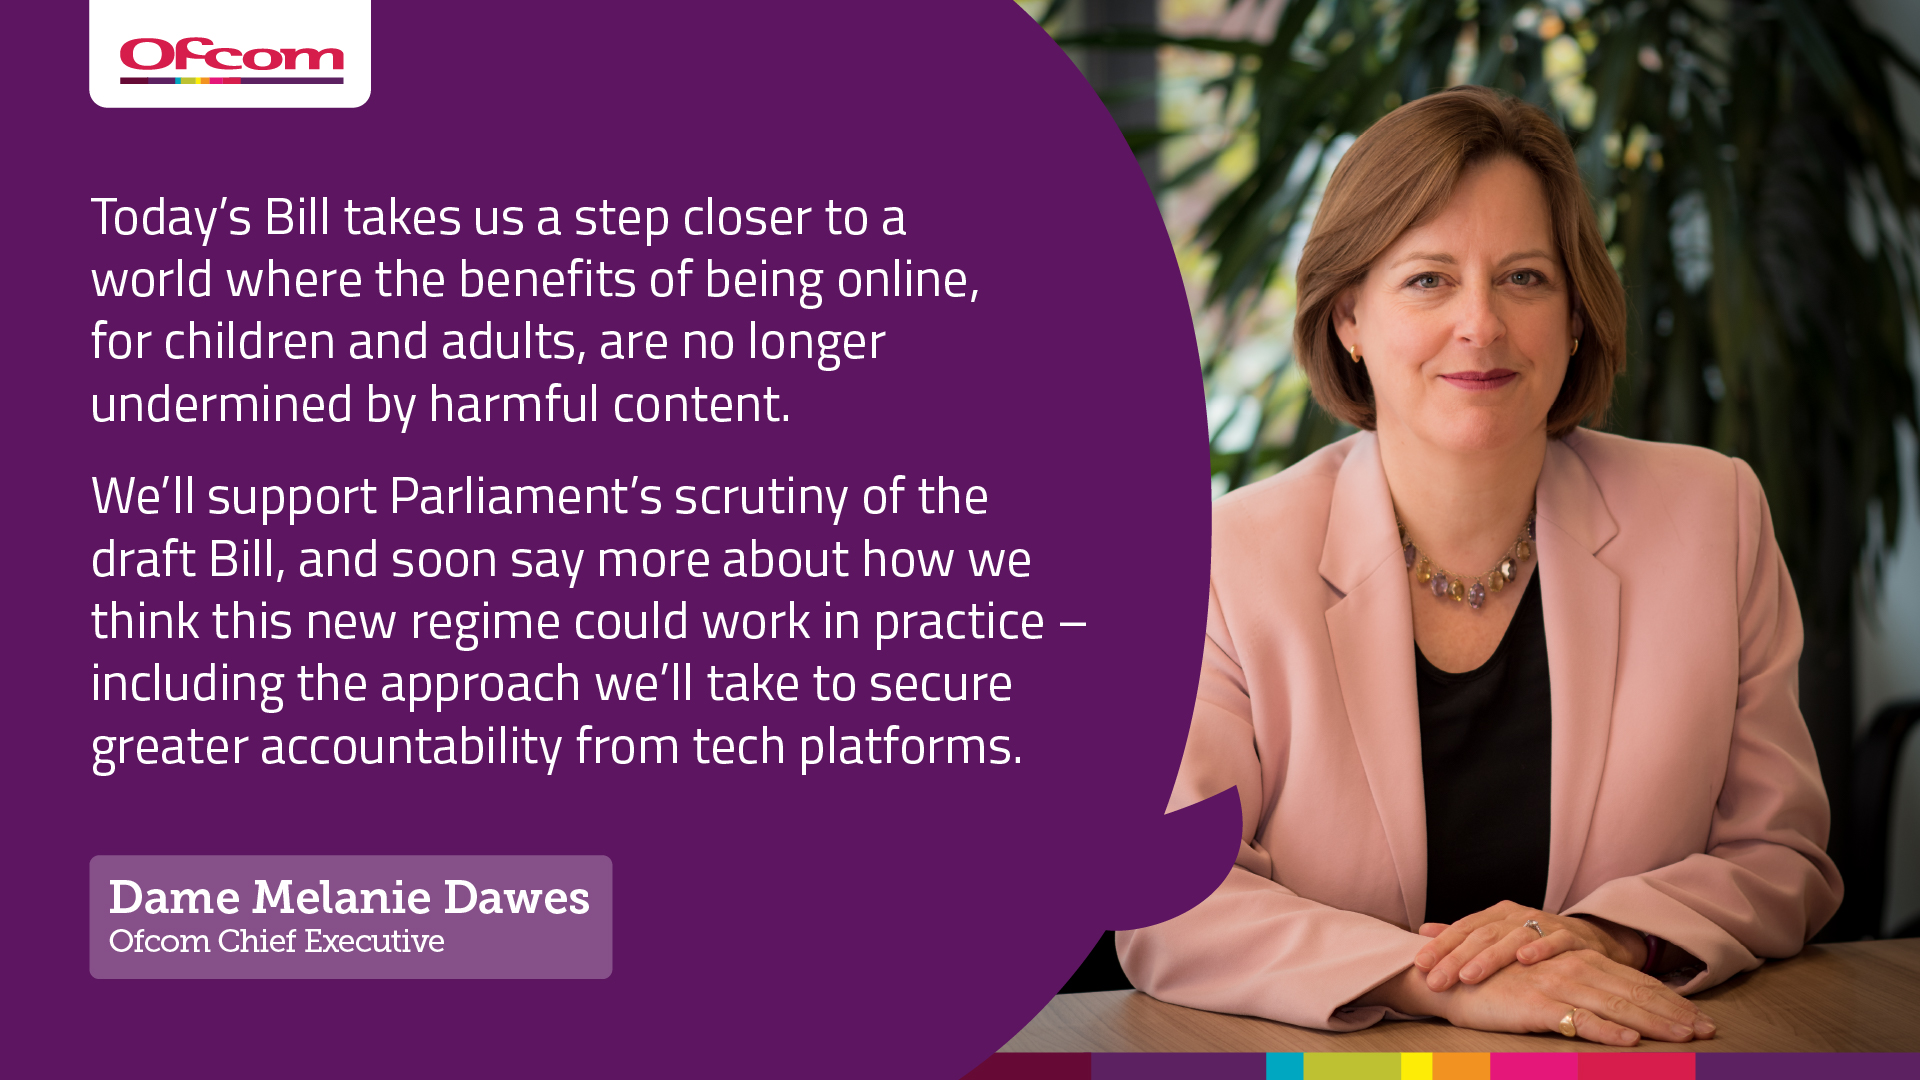 Quote from Melanie Dawes, Ofcom's Chief Executive: Today’s Bill takes us a step closer to a world where the benefits of being online, for children and adults, are no longer undermined by harmful content. We’ll support Parliament’s scrutiny of the draft Bill, and soon say more about how we think this new regime could work in practice – including the approach we’ll take to secure greater accountability from tech platforms.